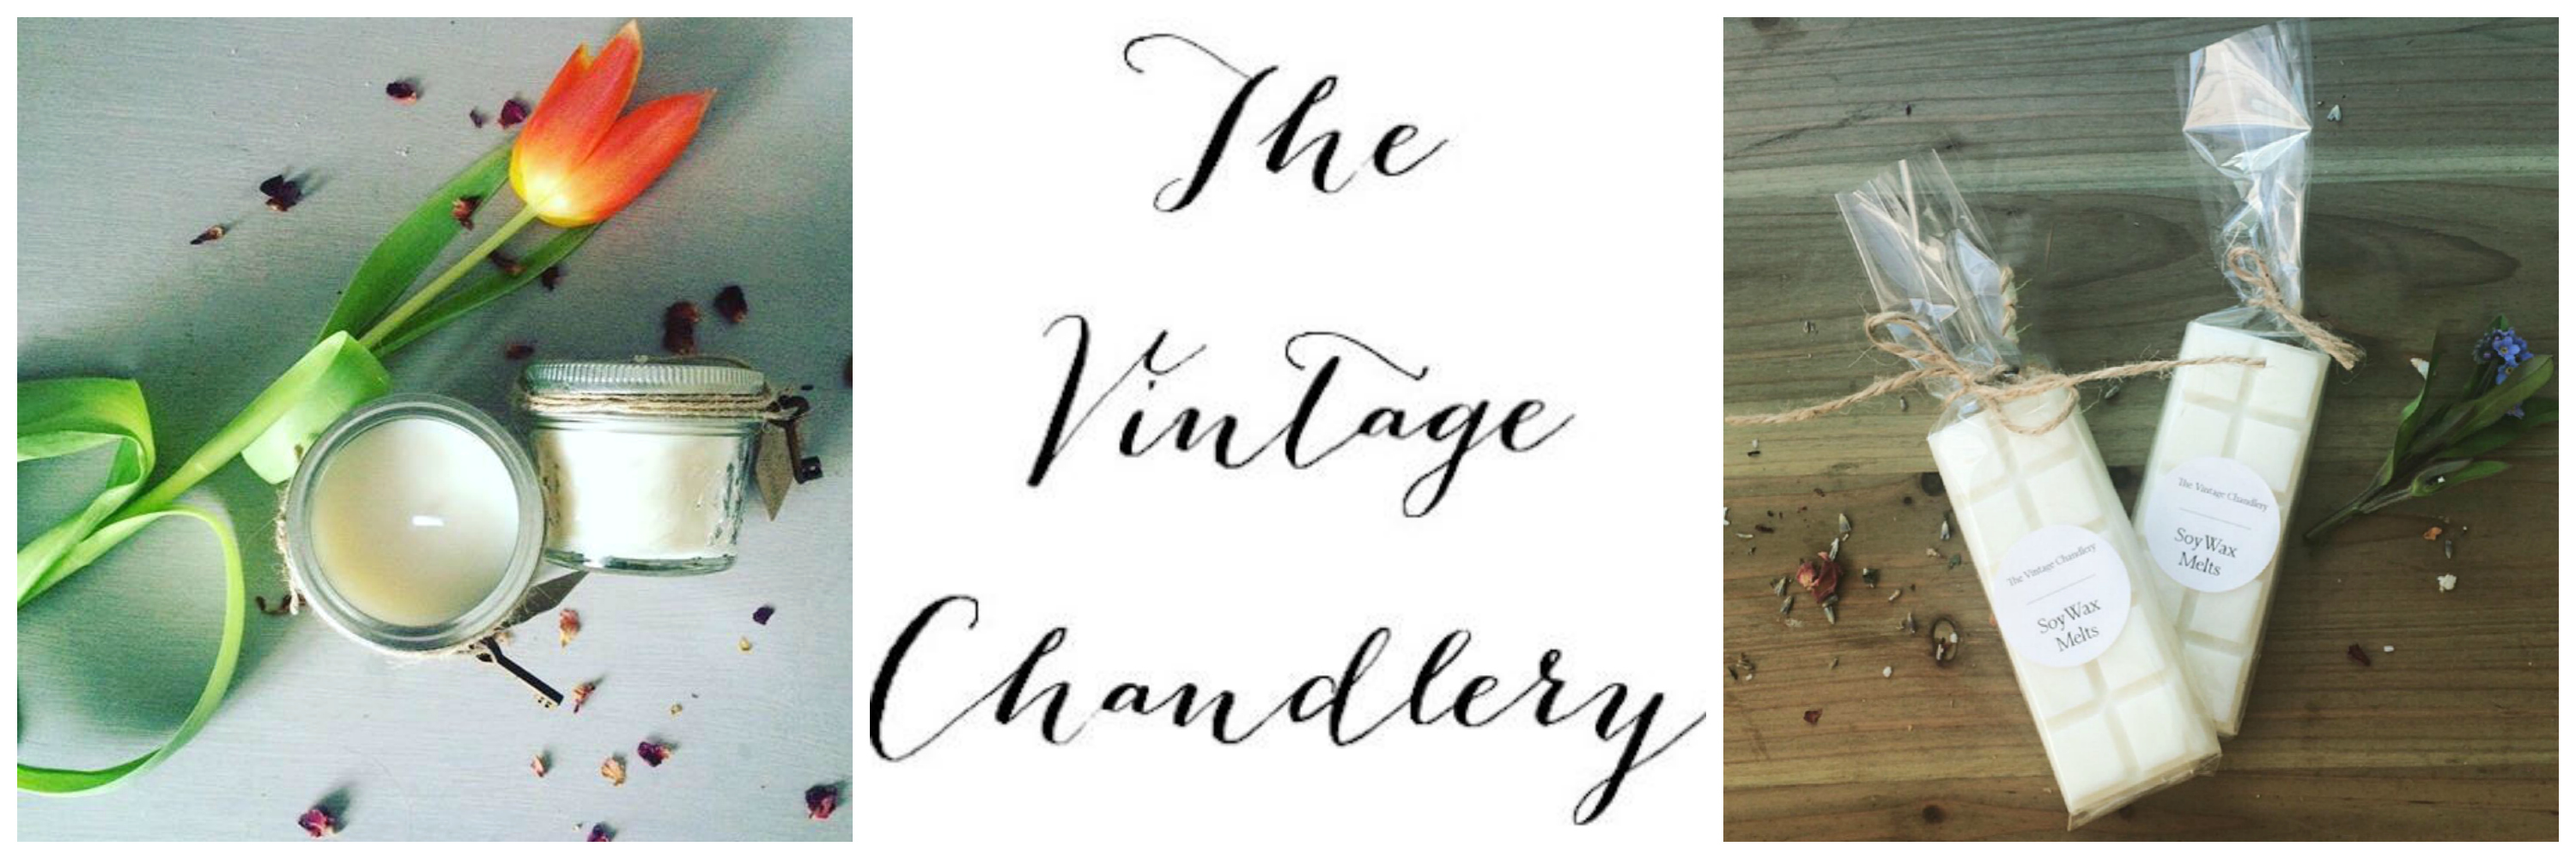 The Vintage Chandlery